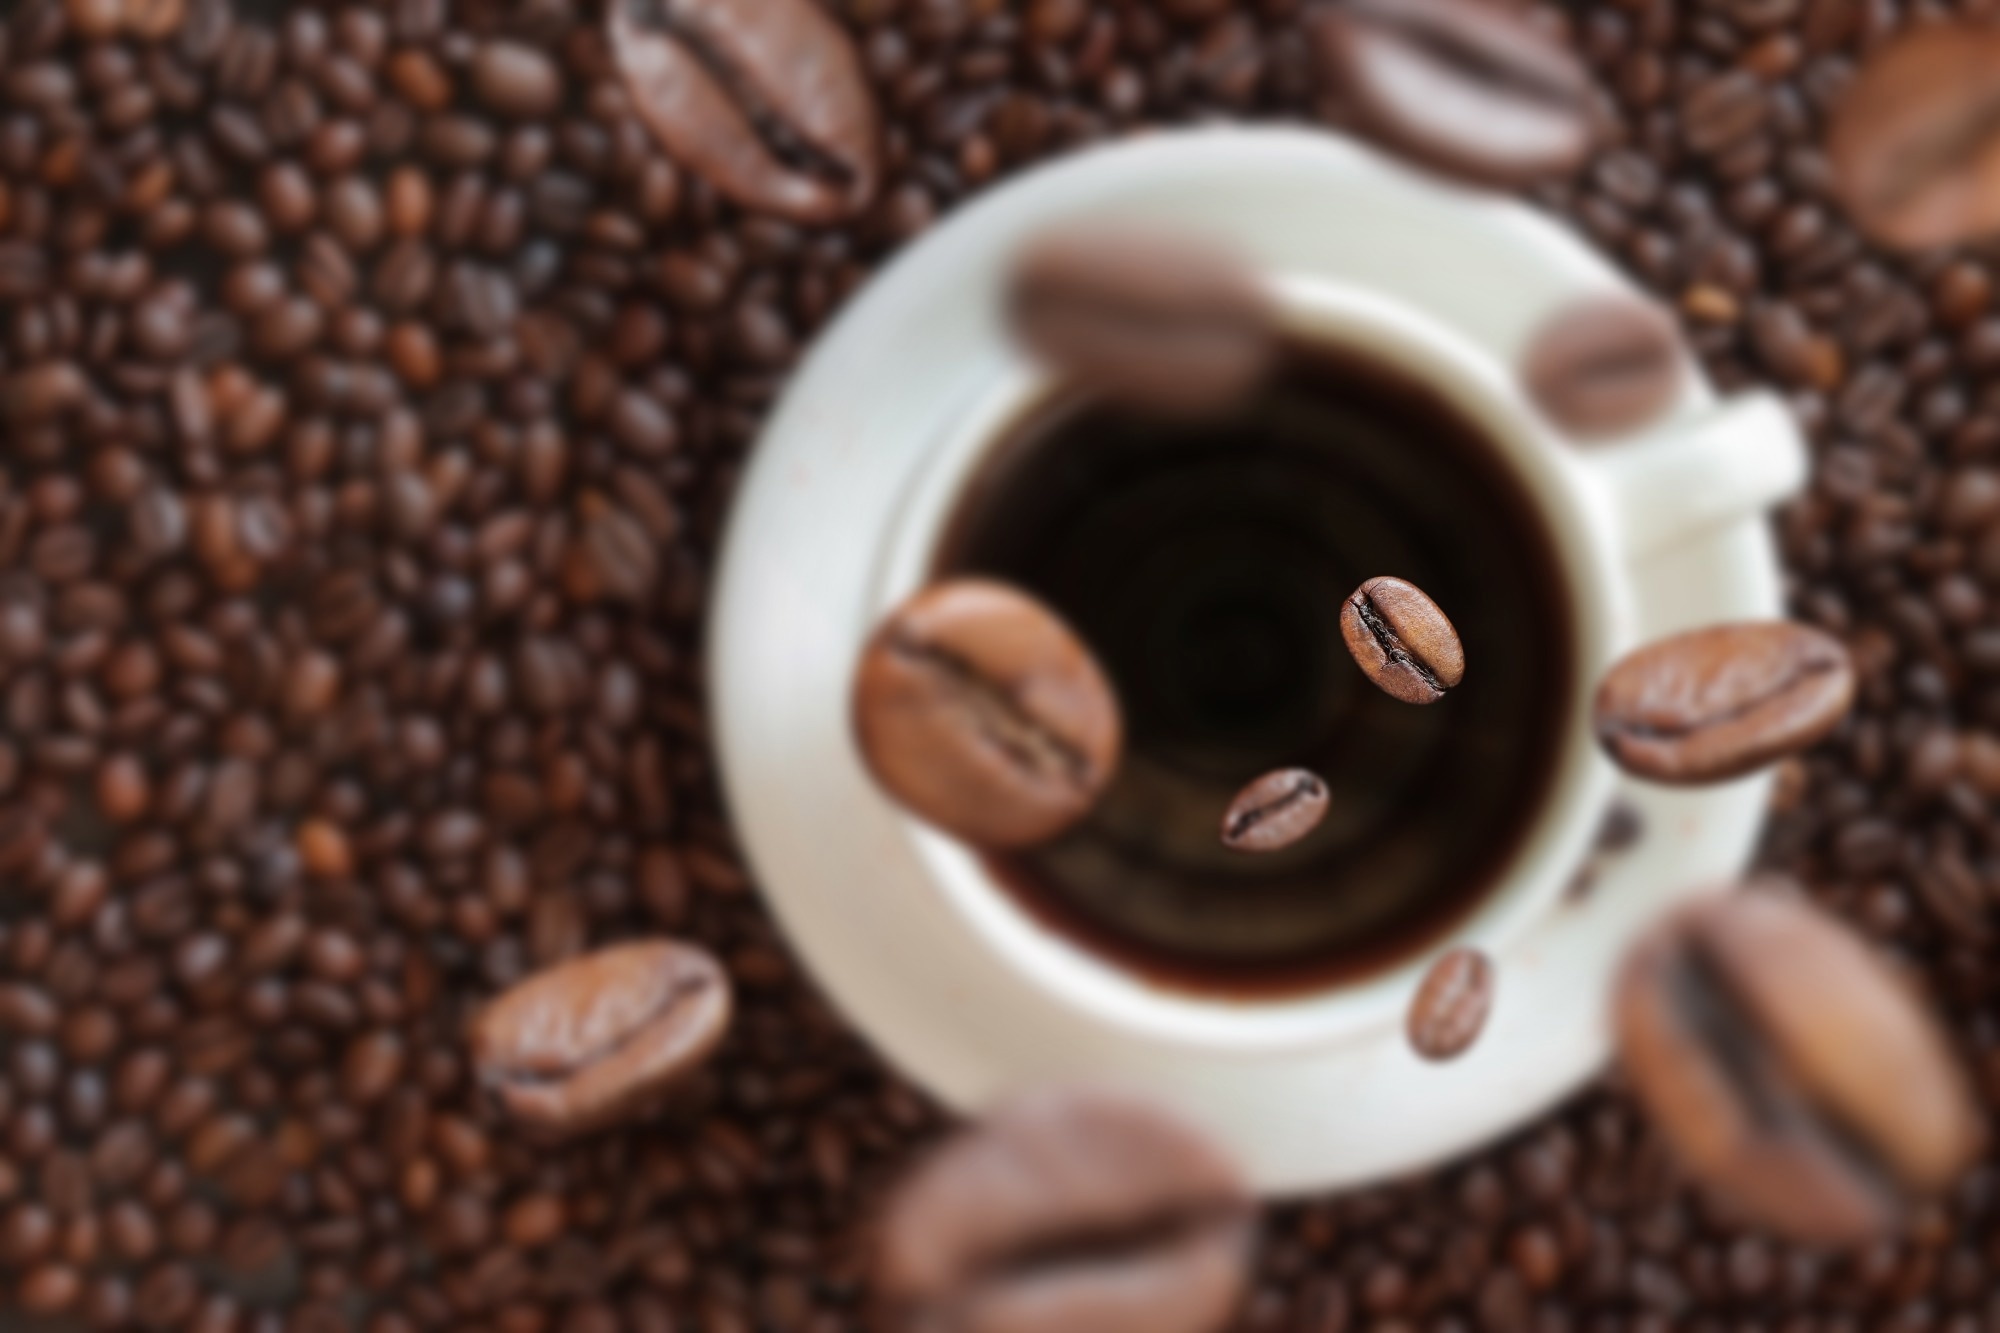 Study: Belief That Caffeine Ingestion Improves Performance in a 6-Minute Time Trial Test without Affecting Pacing Strategy. Image Credit: lymenko Mariia/Shutterstock.com